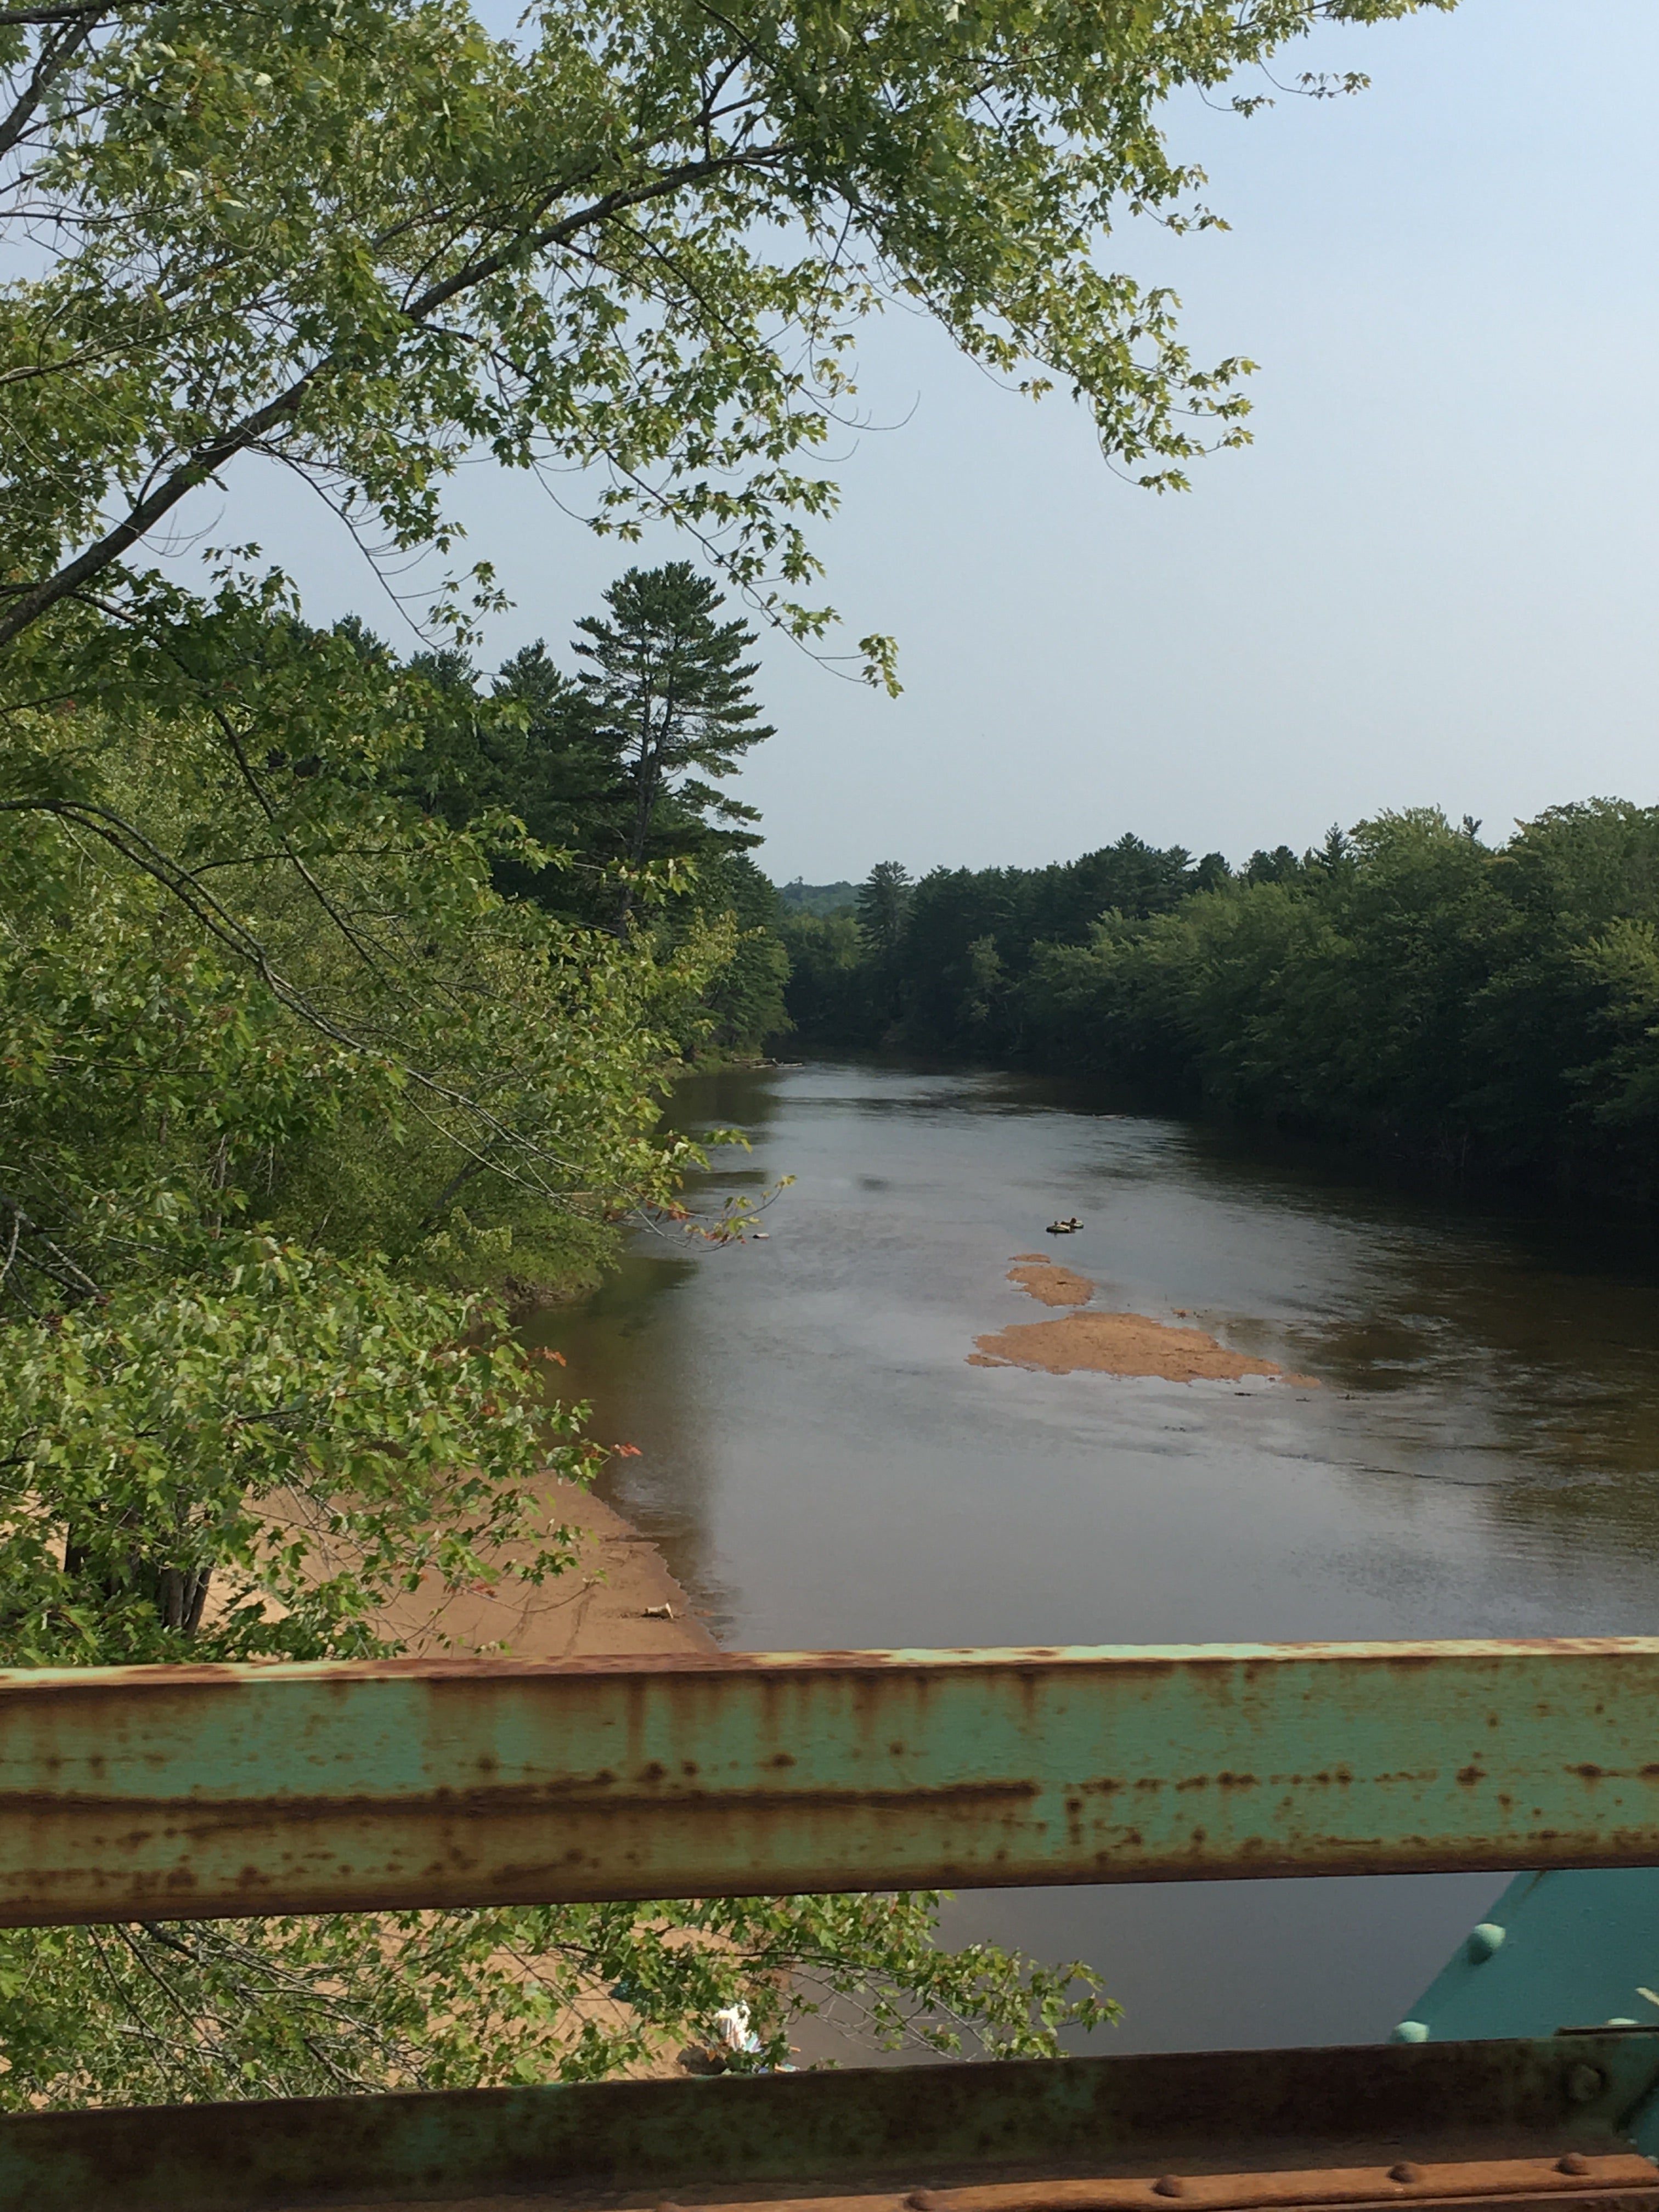 The Saco river, perfect for family boat trips.